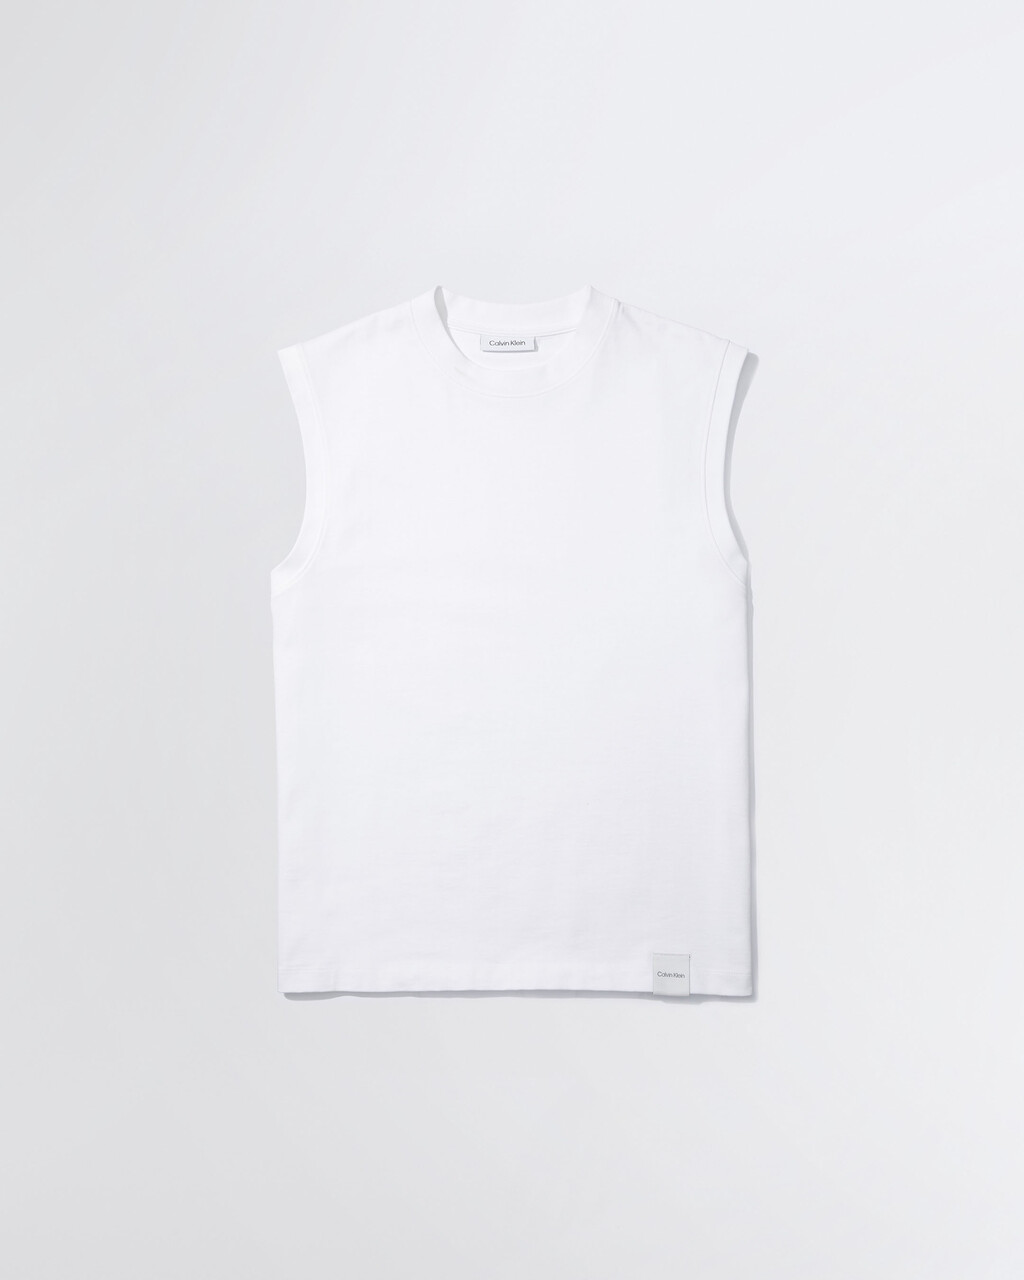 CK STANDARDS COMPACT MUSCLE T 恤, BRILLIANT WHITE, hi-res